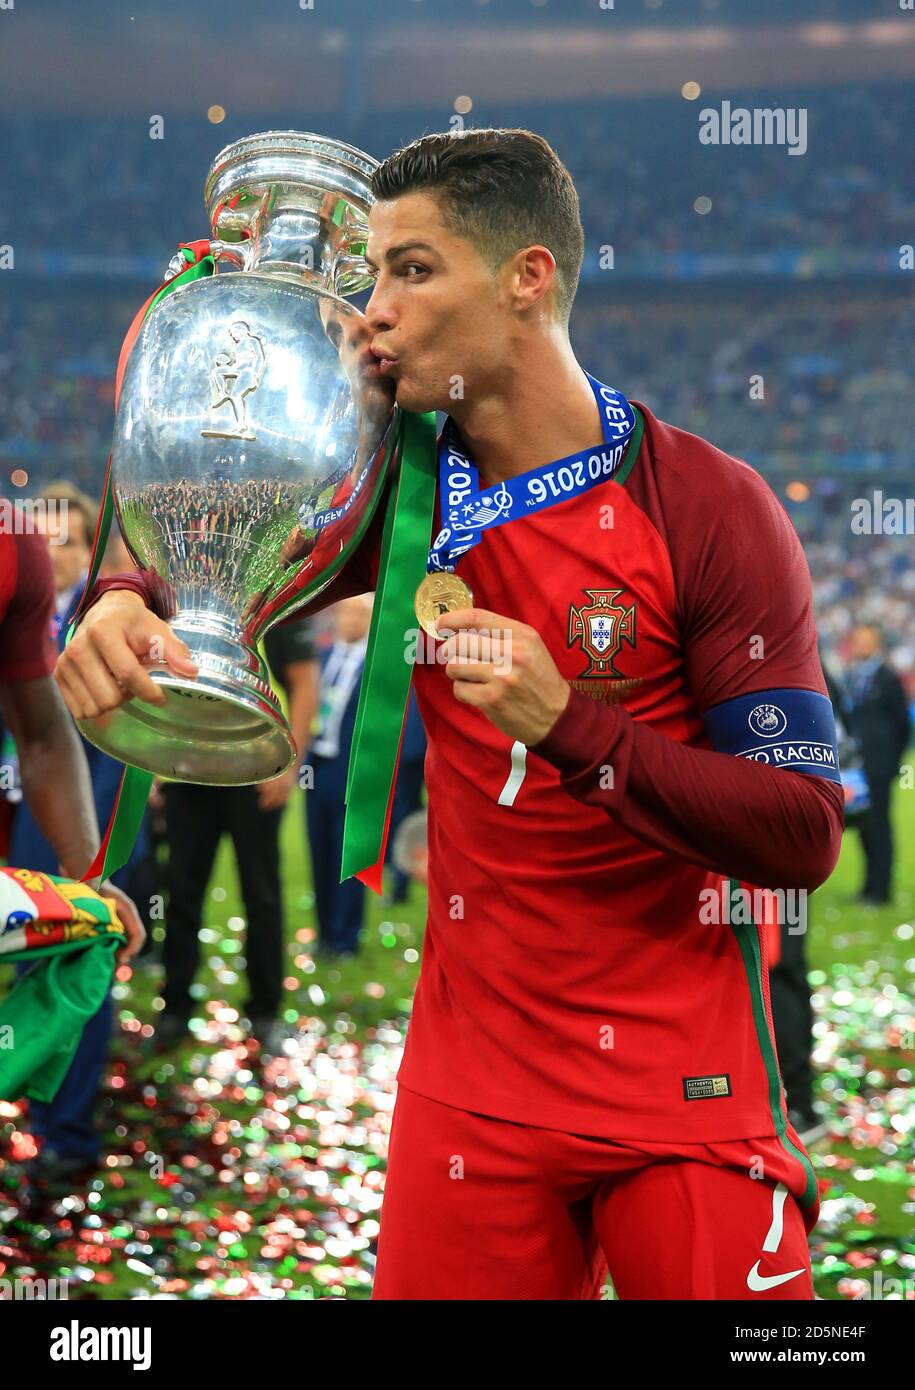 Portugal S Cristiano Ronaldo Celebrates With The Trophy On The Pitch After Portugal Win The Uefa Euro 16 Final Stock Photo Alamy